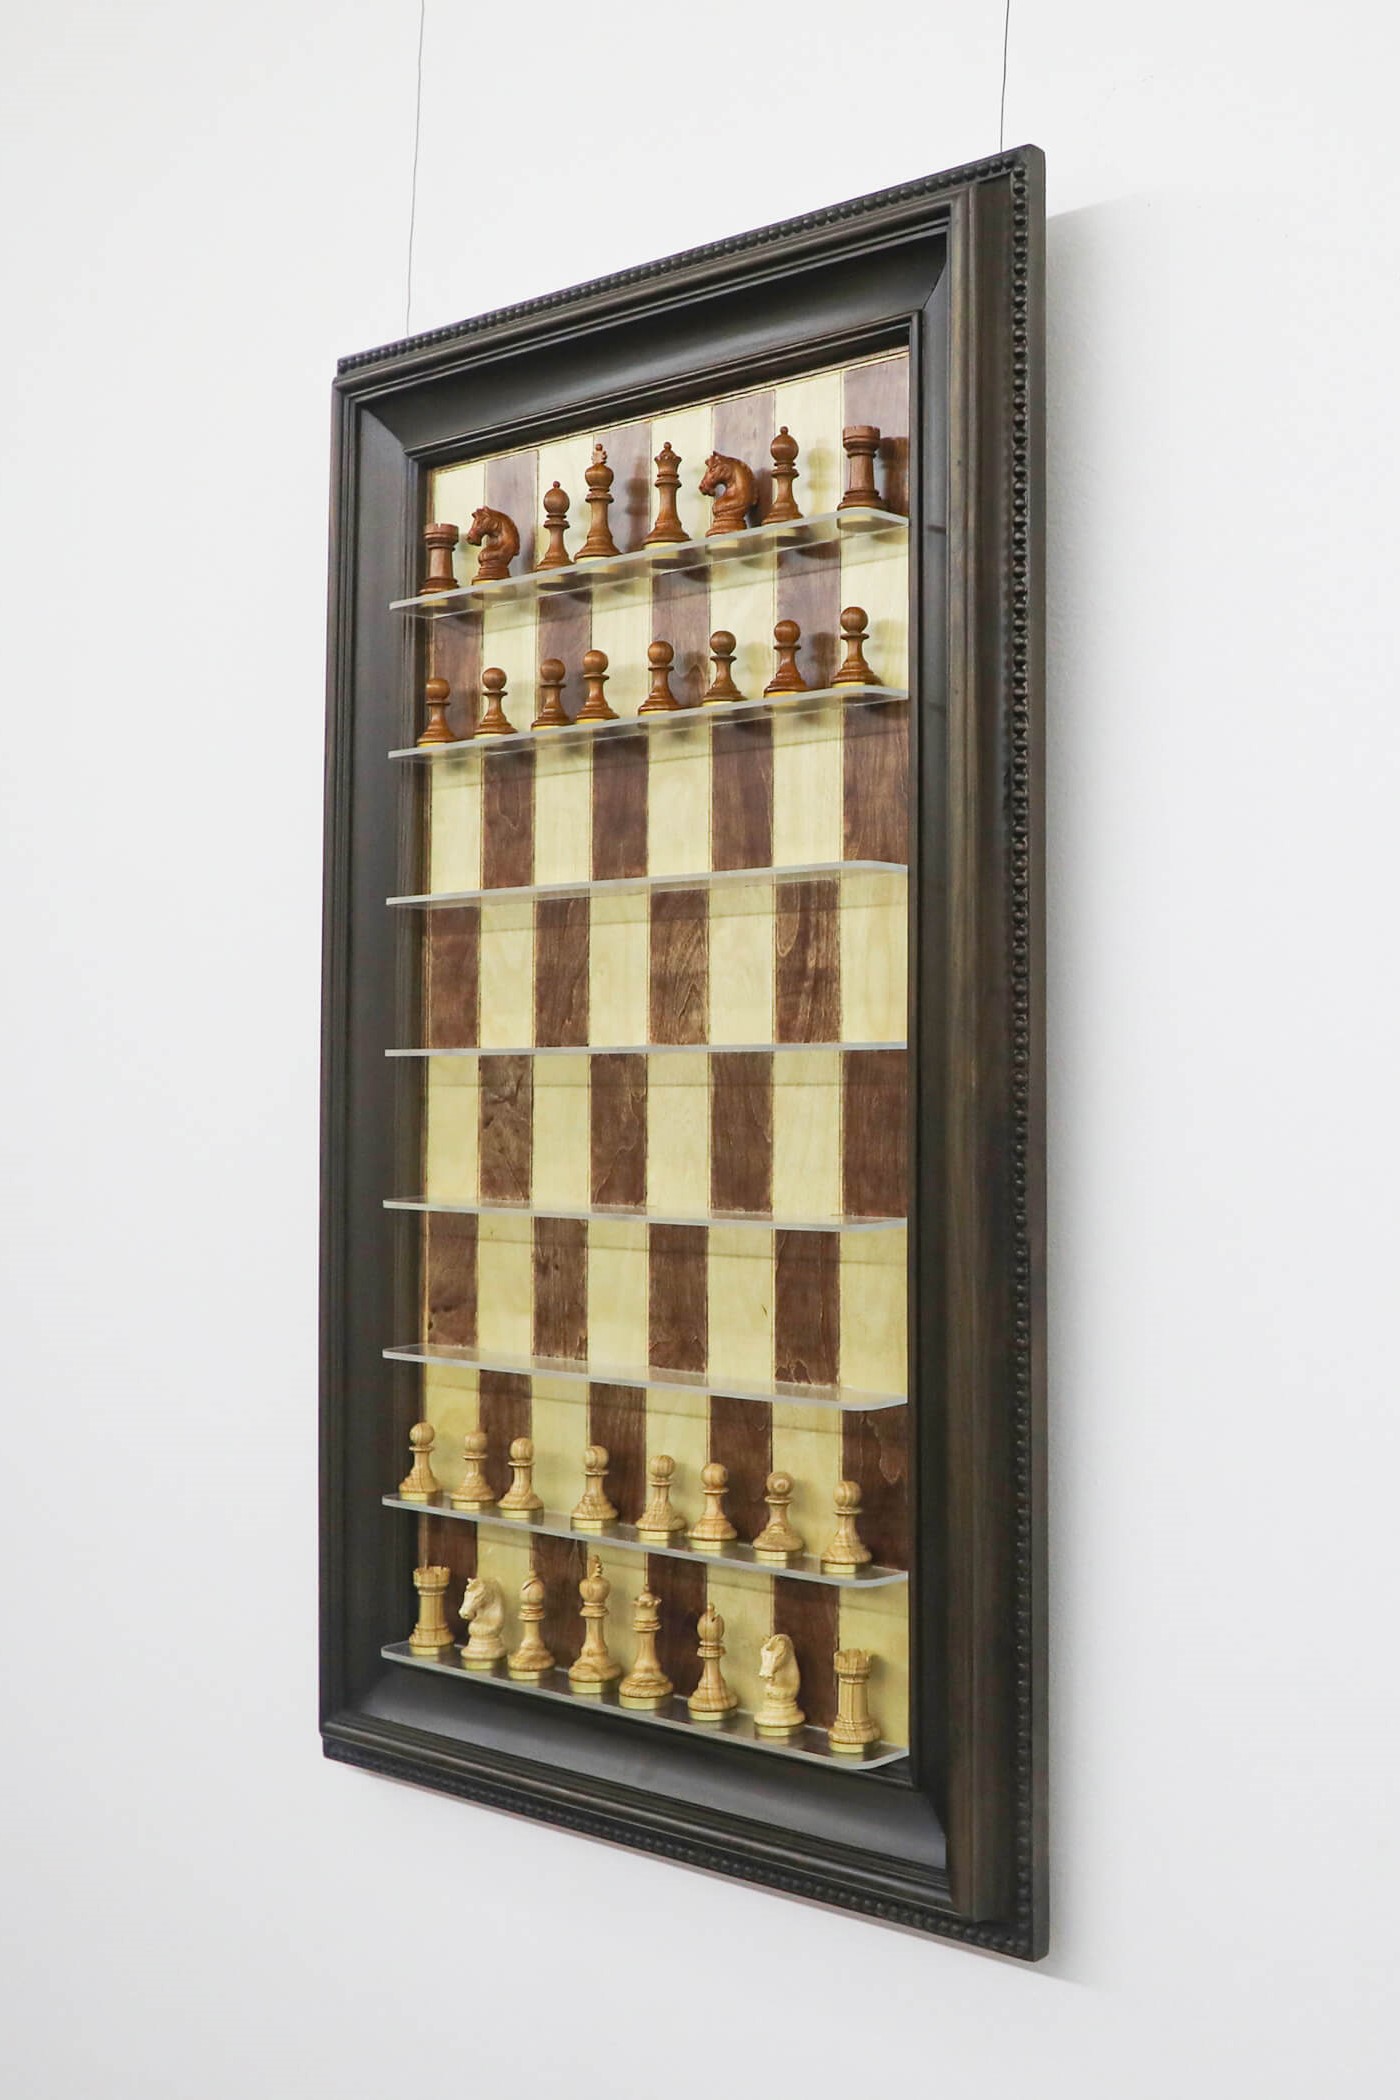 Vertical Wall-Mounted Chess Sets